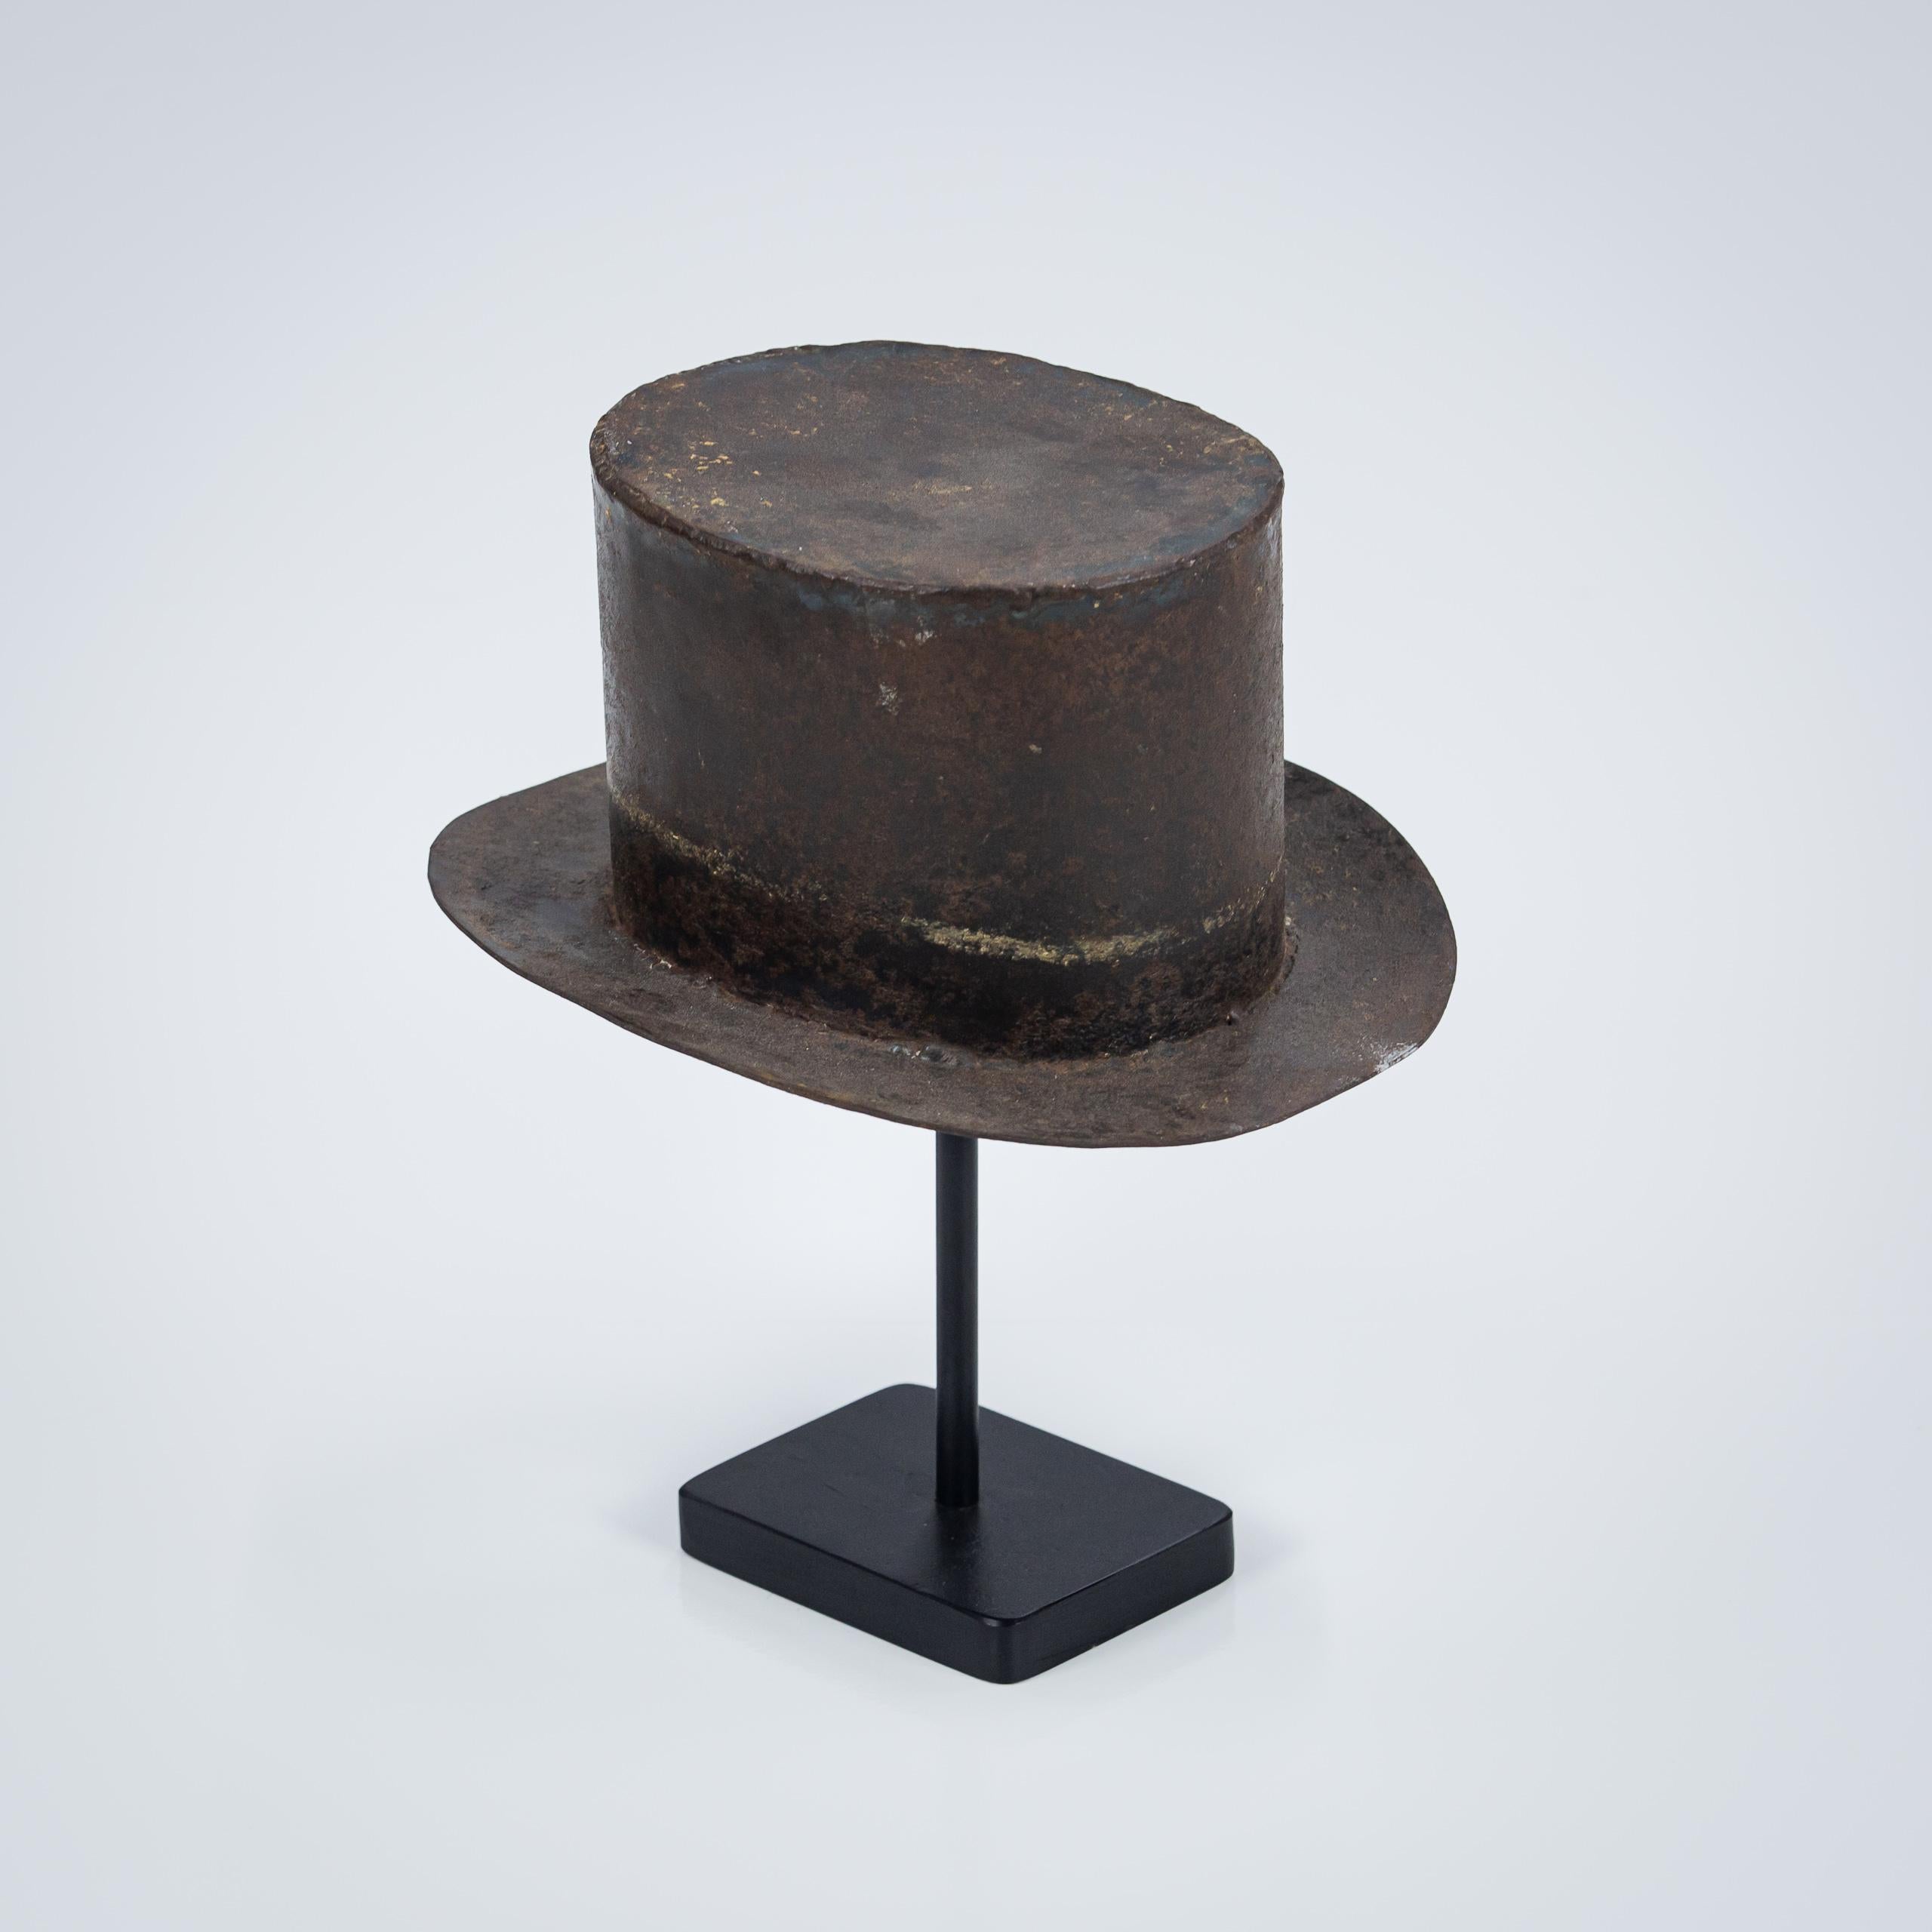 Early 20th Century Hat Makers Trade Sign or Advertising in painted, patinated Iron. Later stand.

France, Circa 1930.